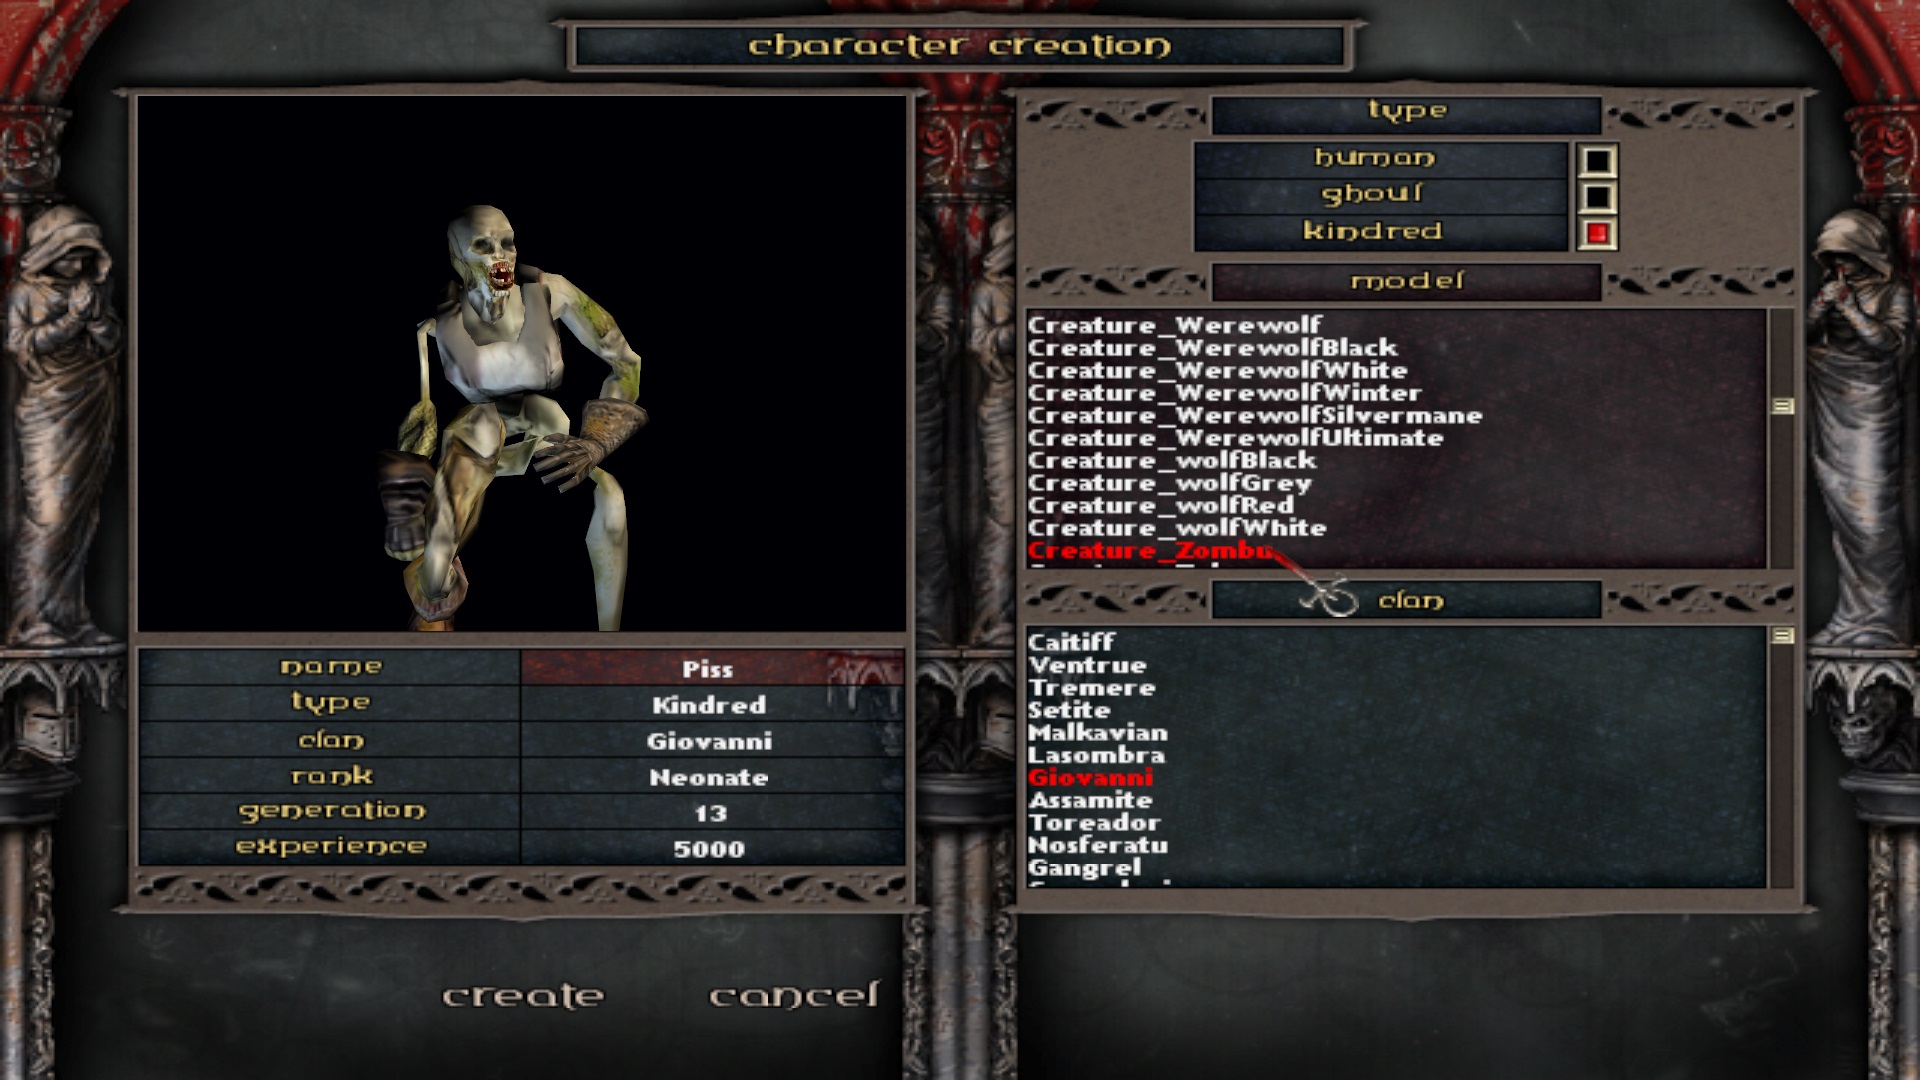 Vampire: The Masquerade - Redemption Download (2000 Role playing Game)